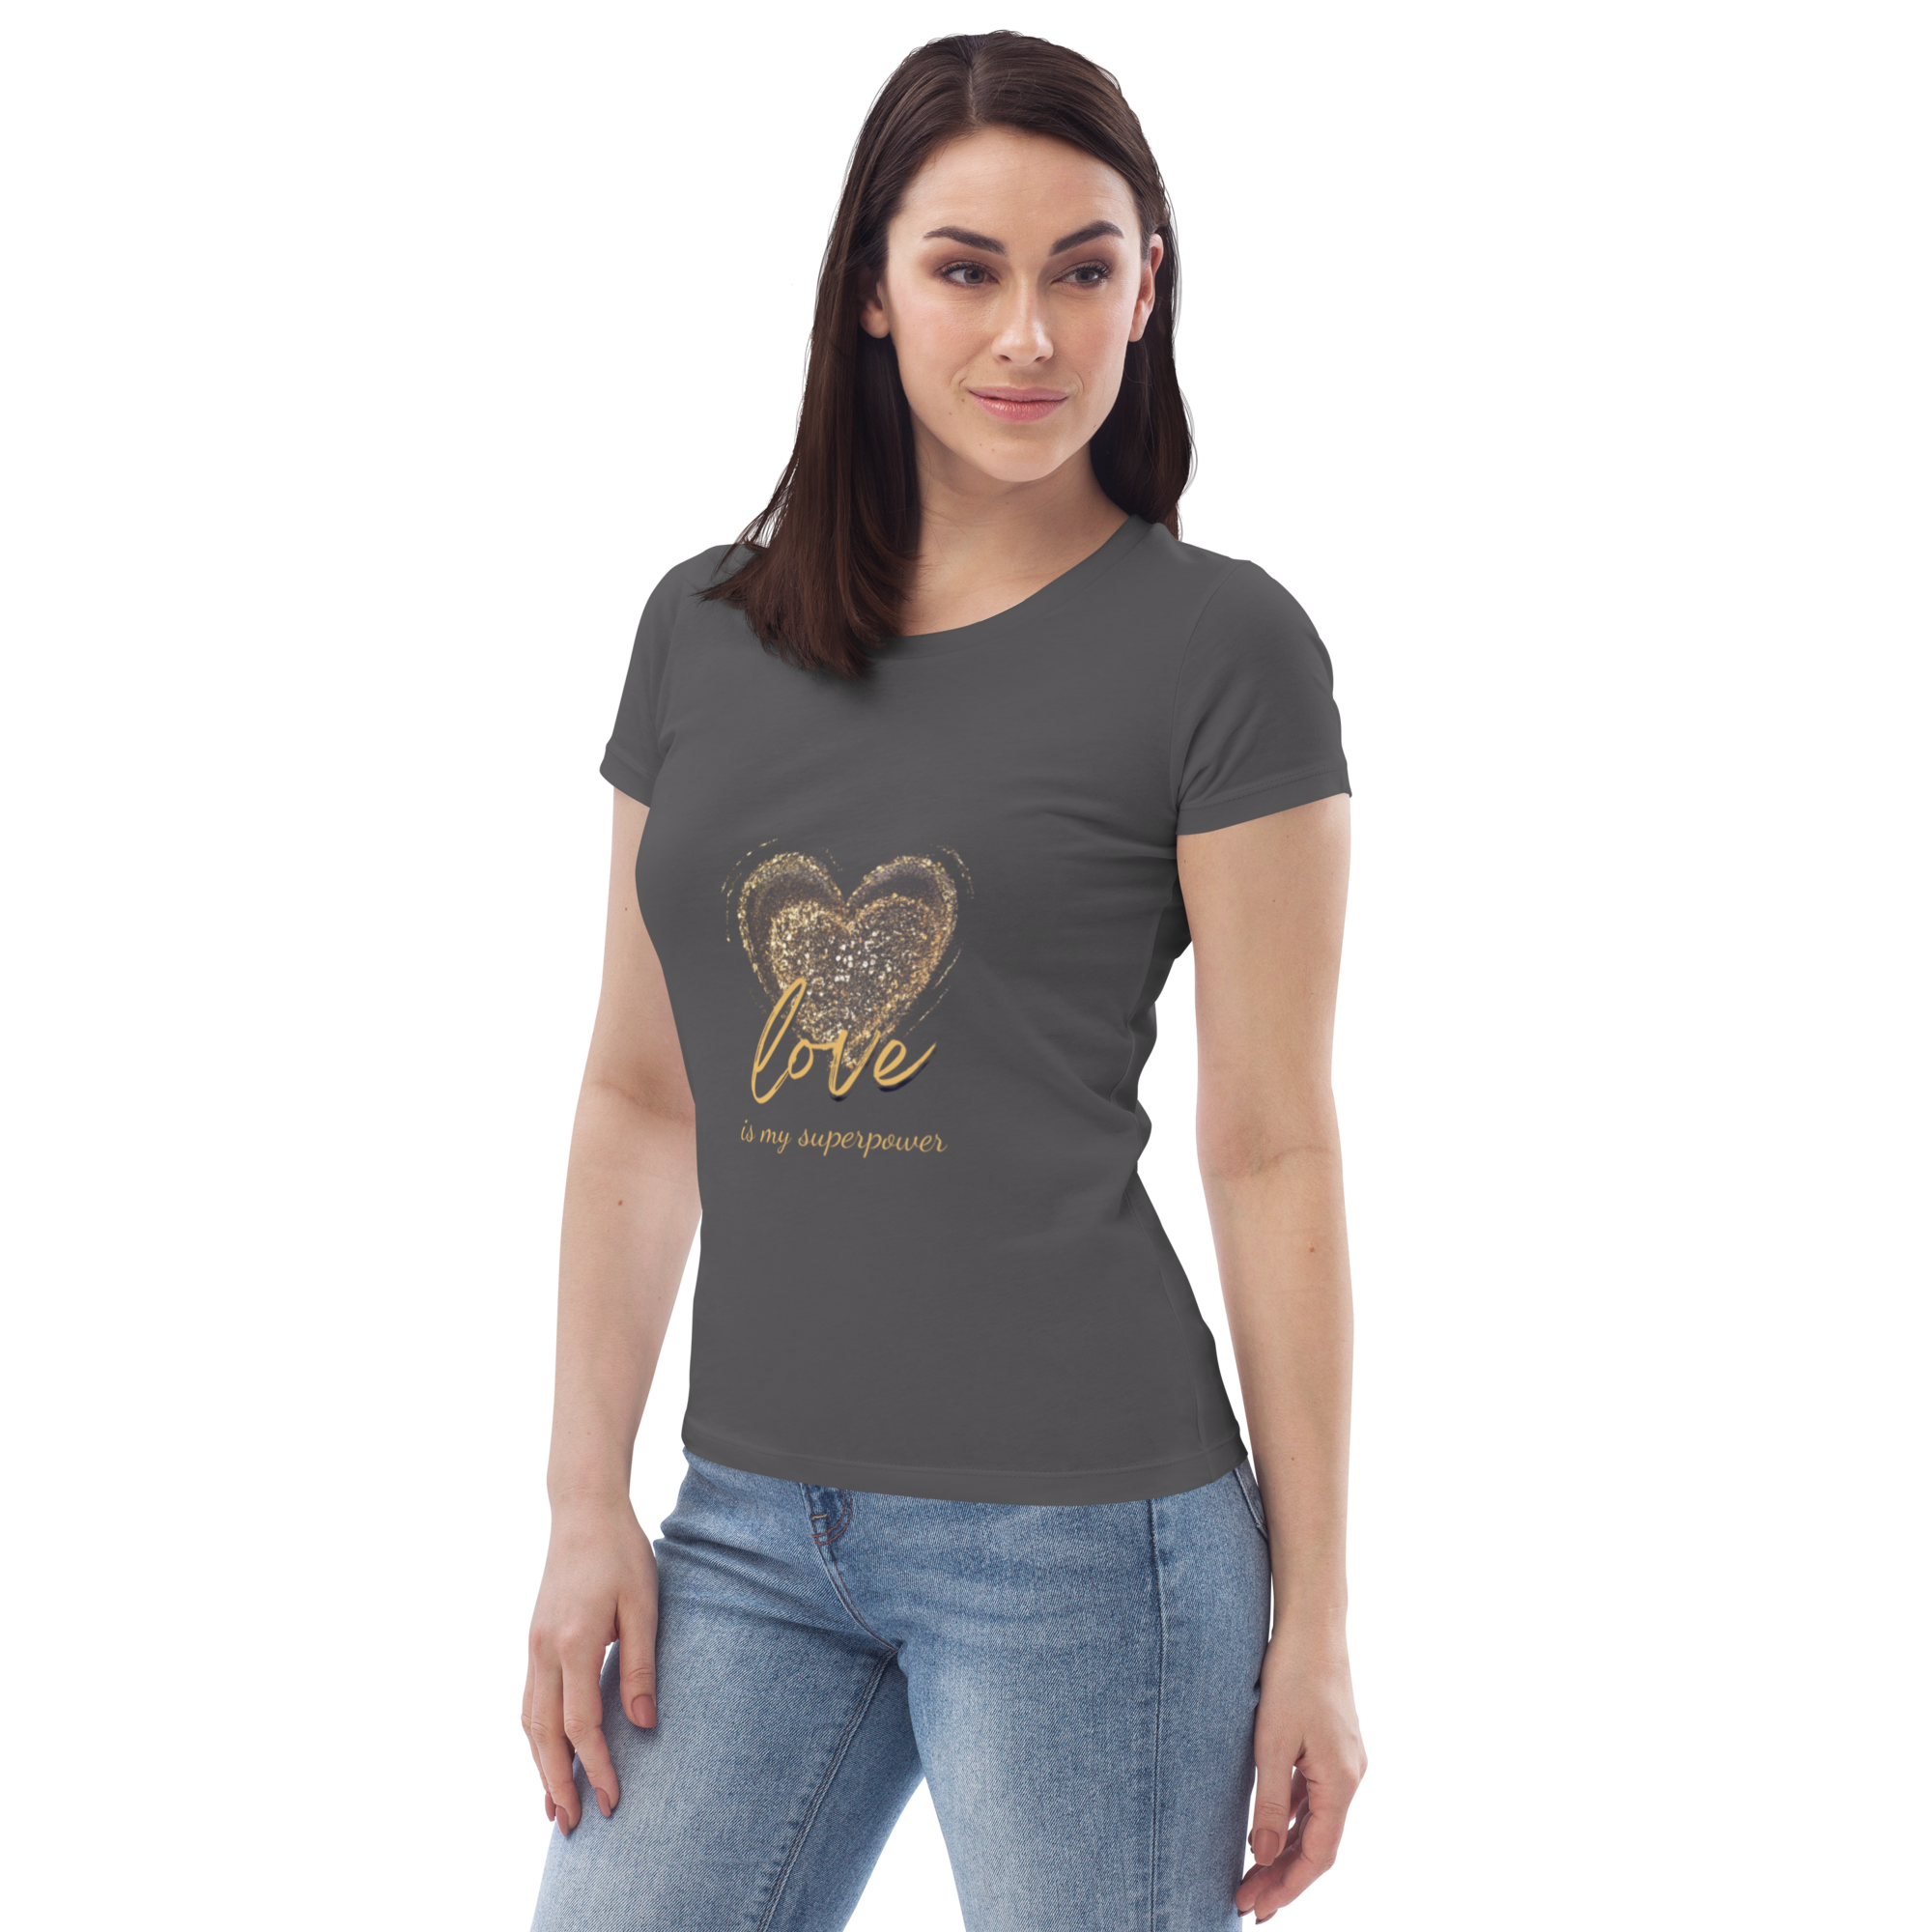 Love is my superpower - Women's fitted eco tee